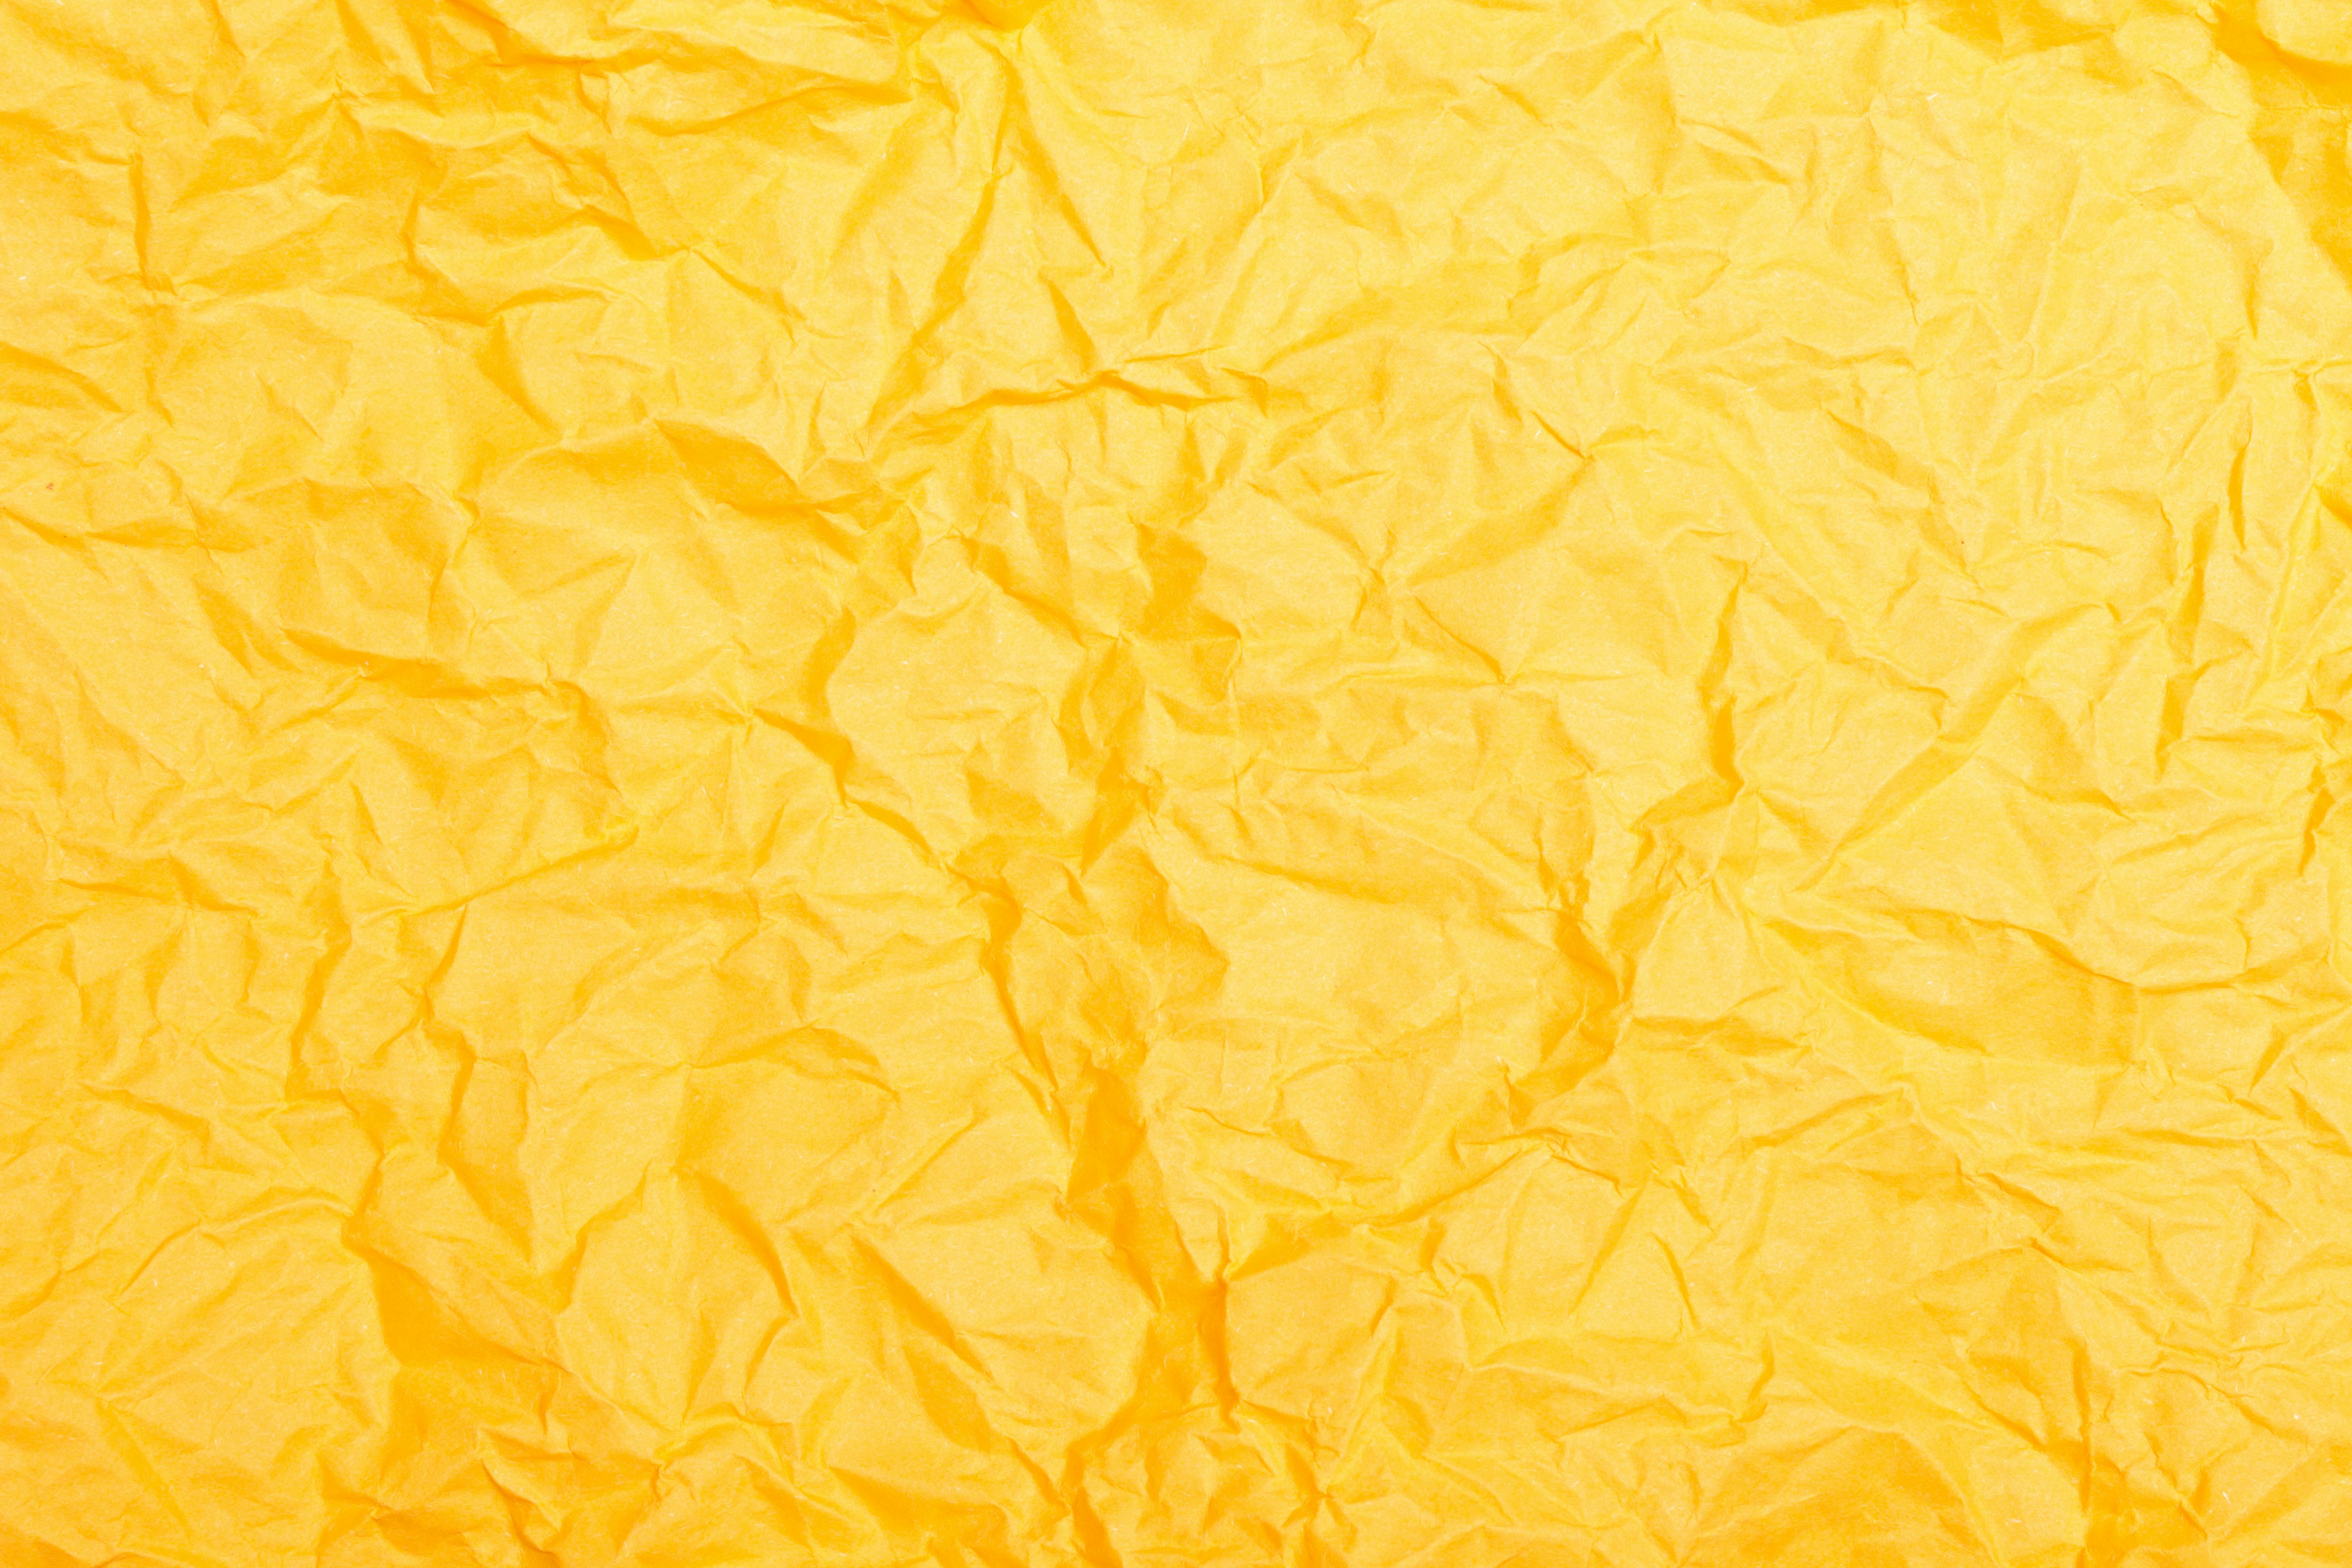 Rough Yellow Paper Image & Photo (Free Trial)